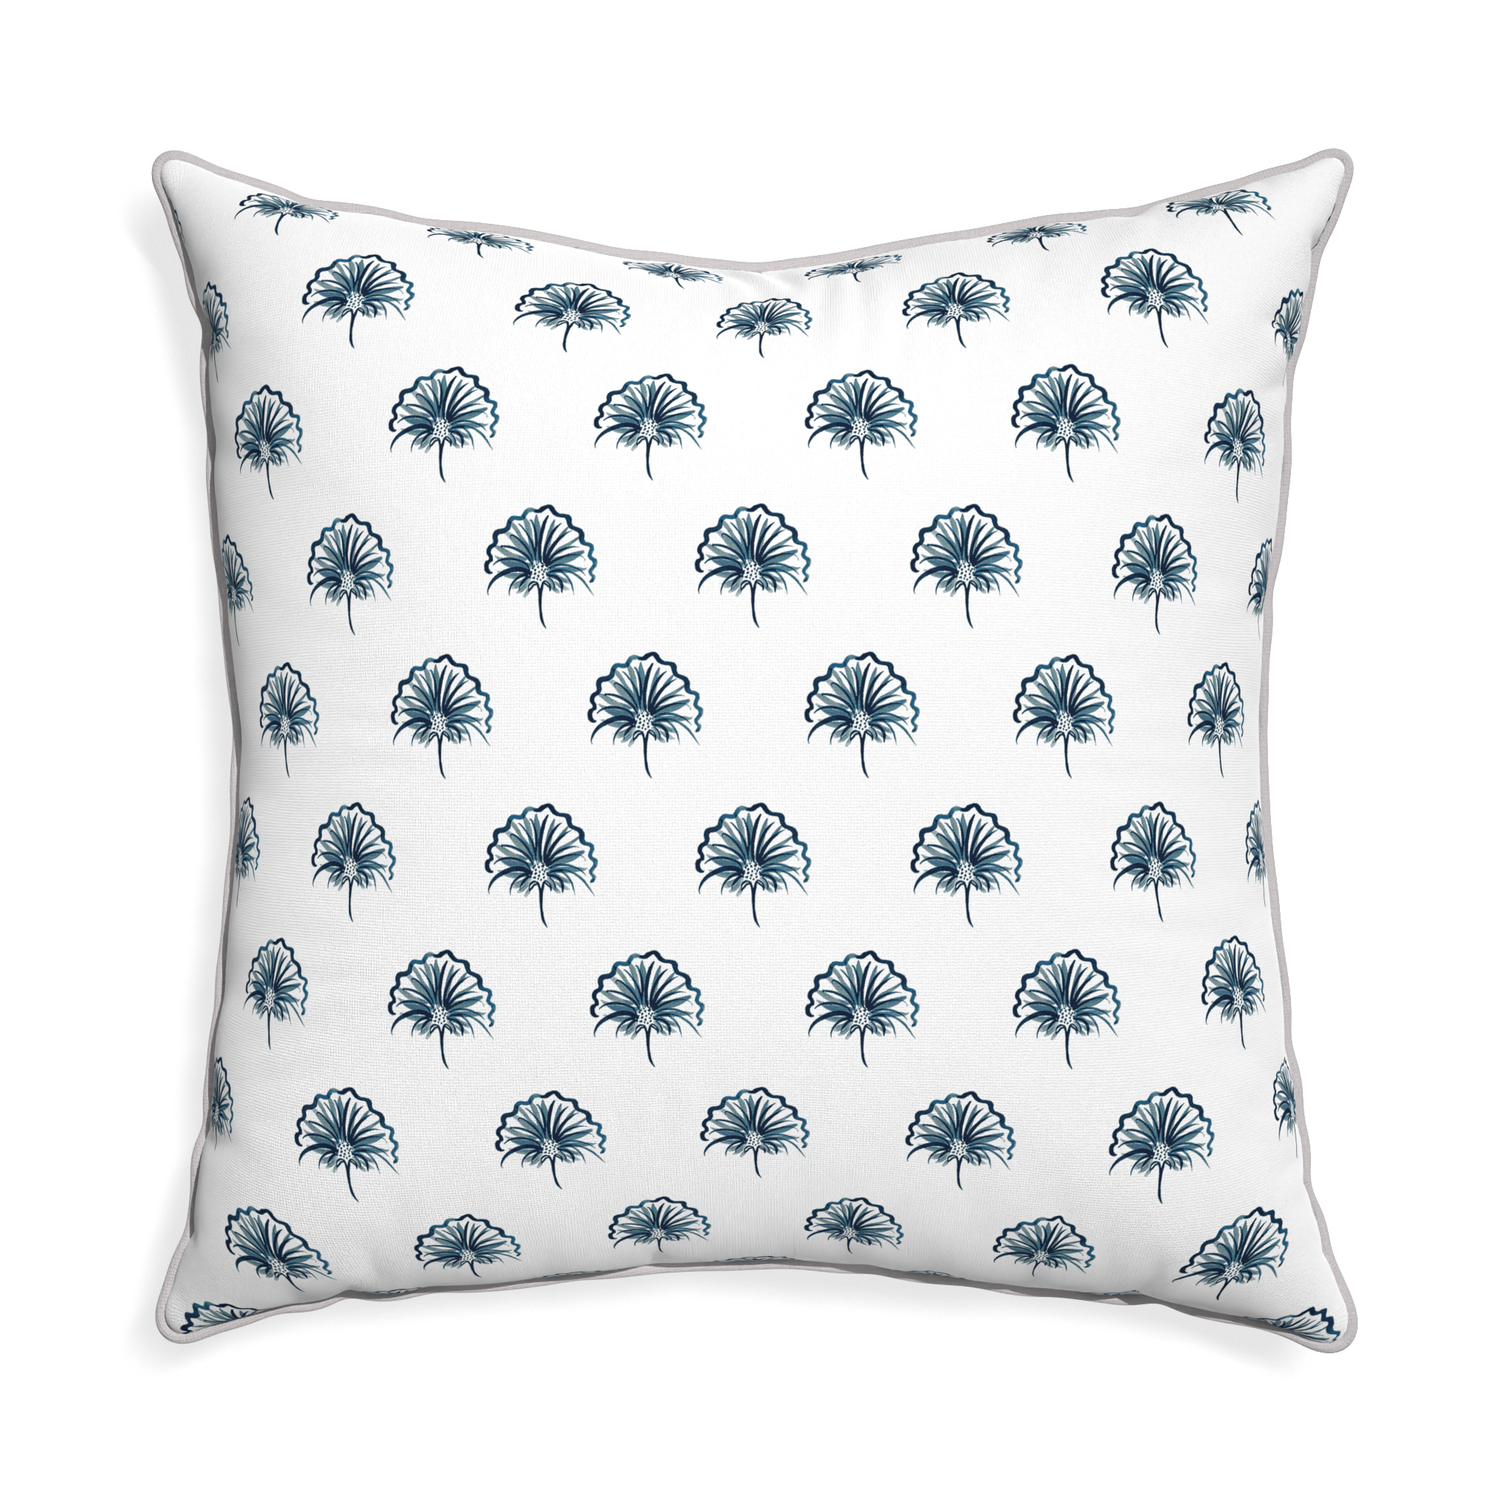 Euro-sham penelope midnight custom floral navypillow with pebble piping on white background